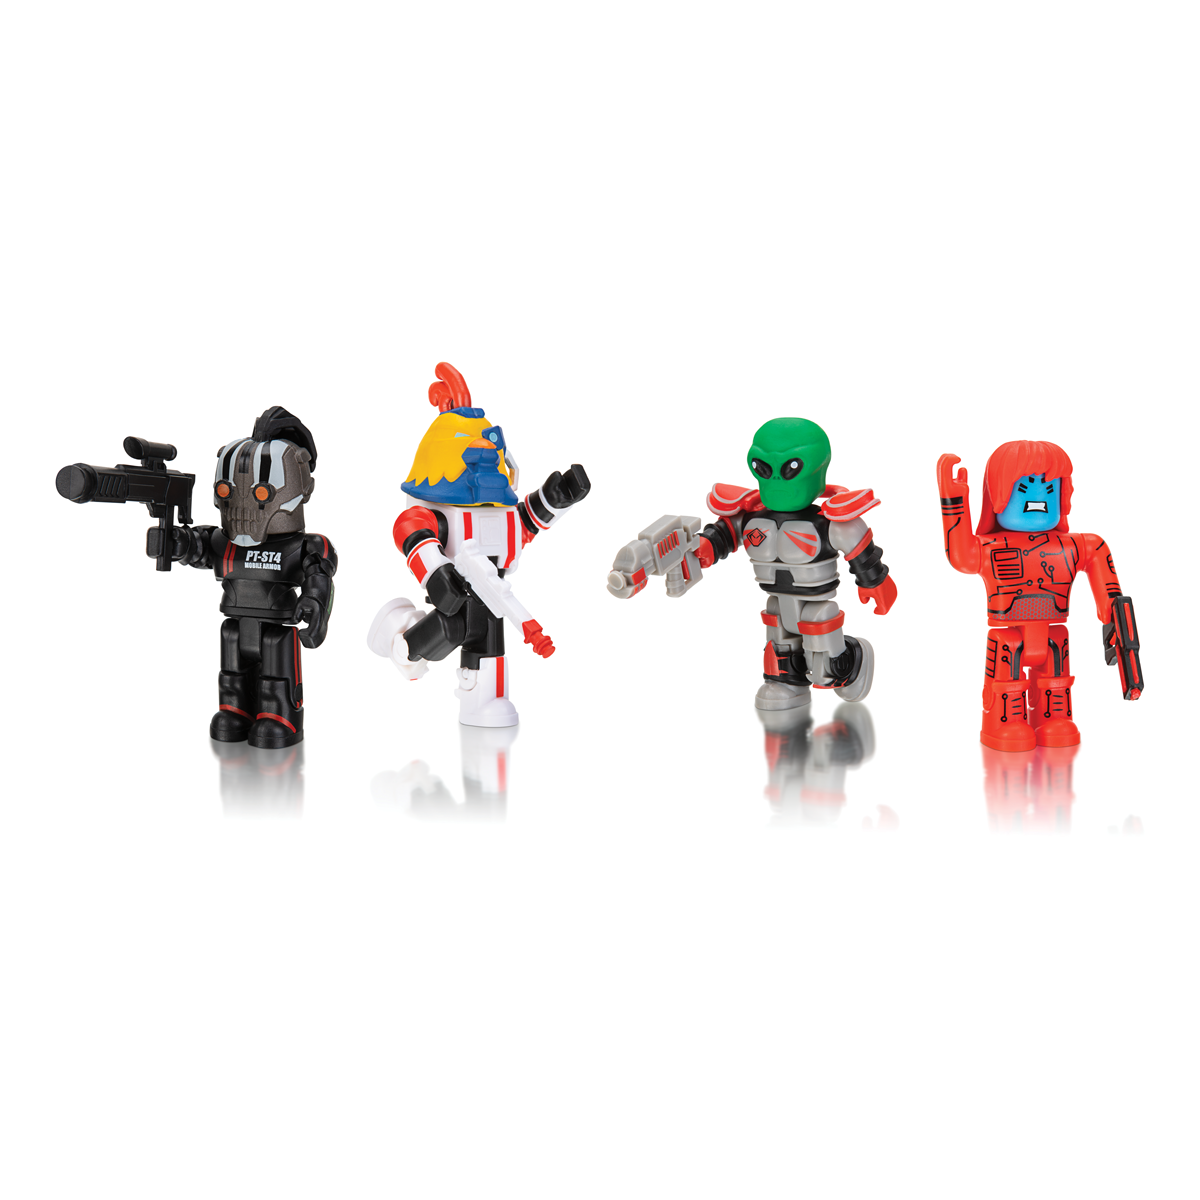 Roblox Star Commandos Mix And Match Figure Set The Entertainer - roblox mix n match star commandos series 6 roblox action figures playsets smyths toys uk